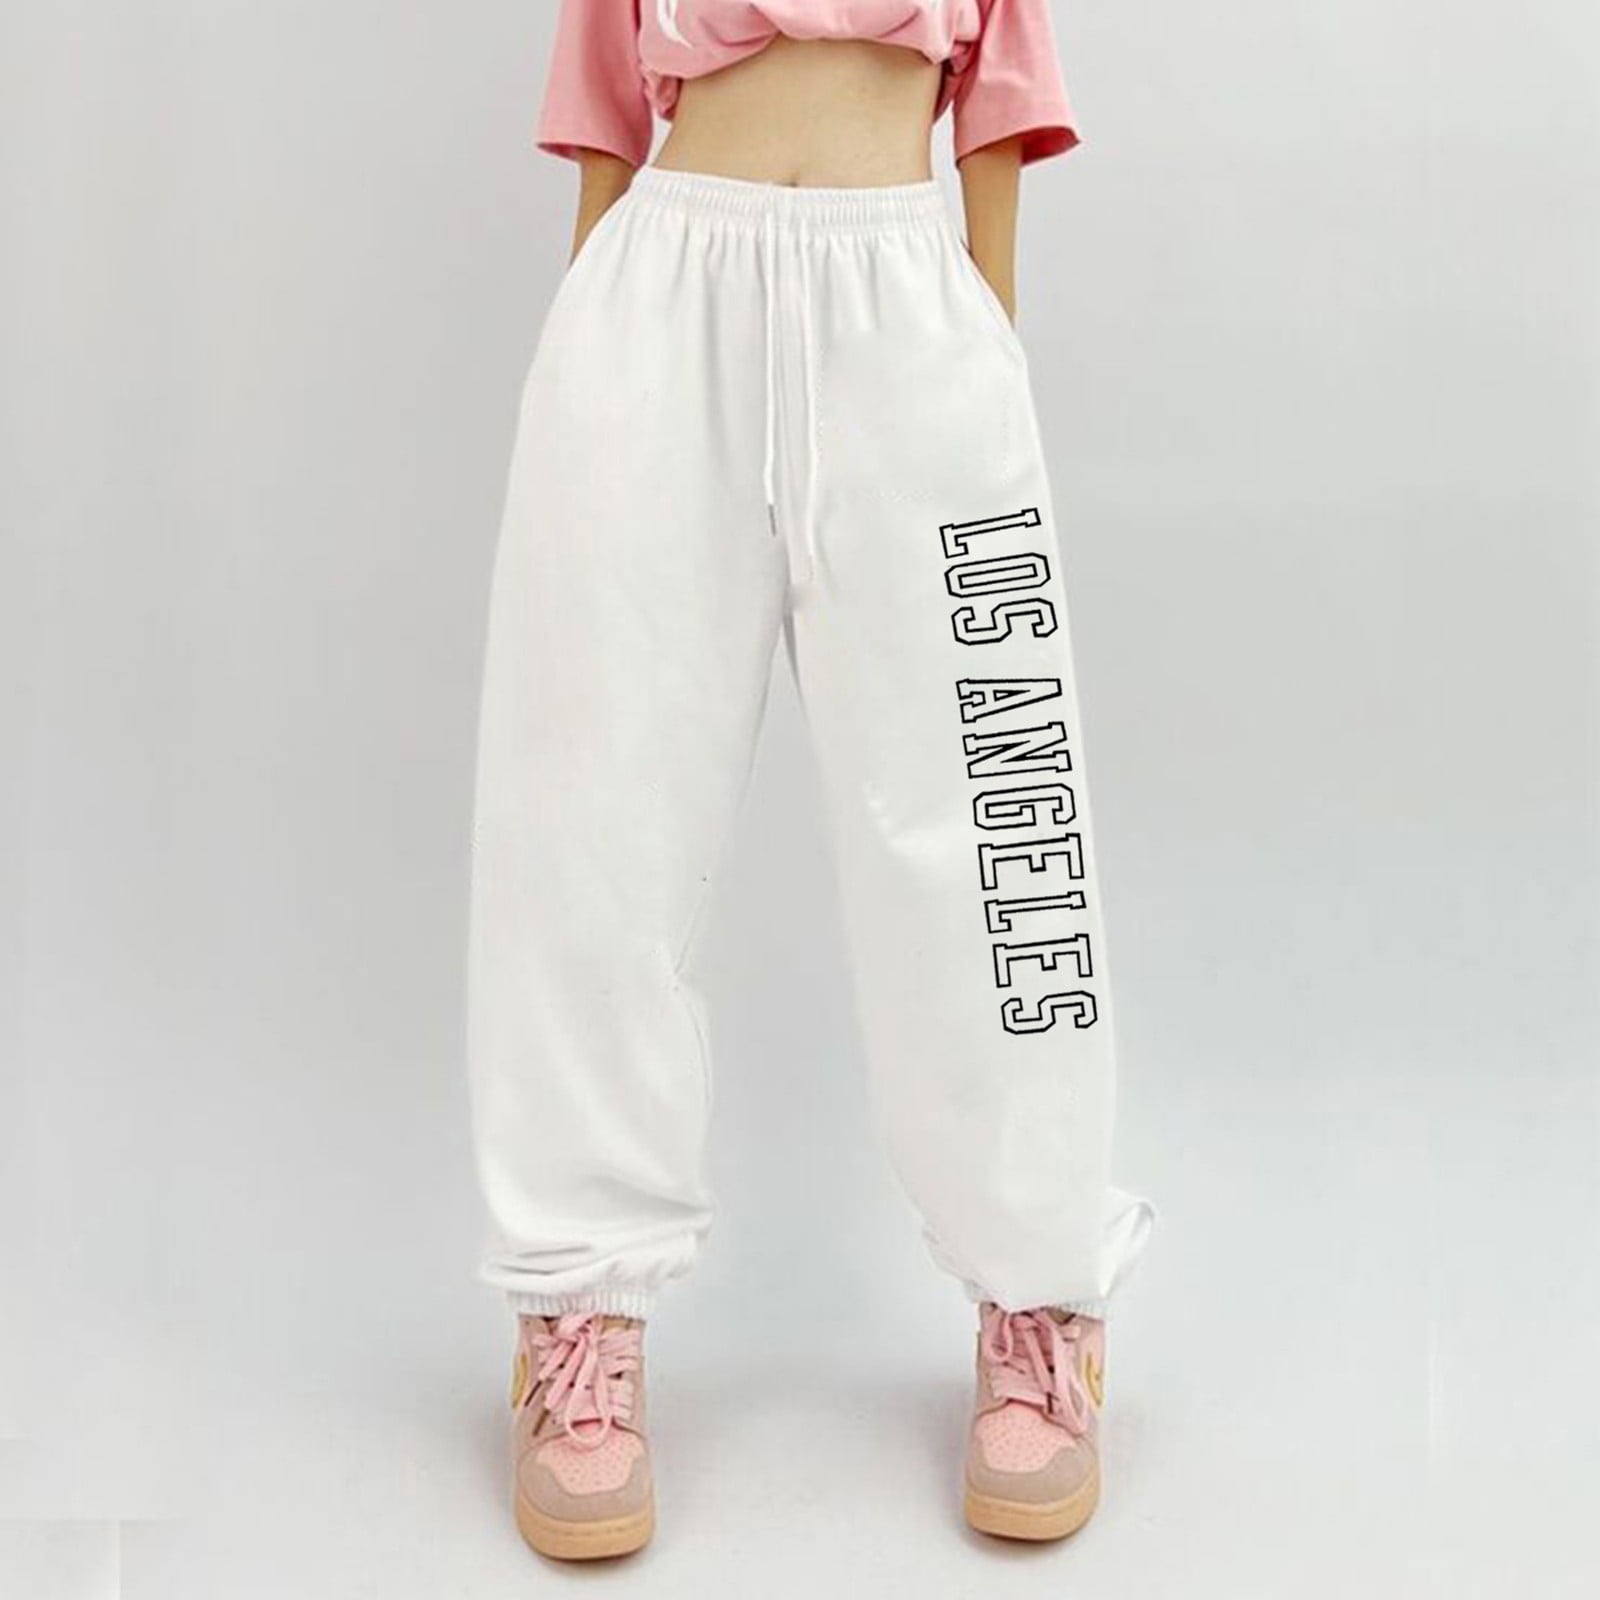 CAICJ98 Sweat Pants for Womens Sweatpants for Women with Pockets